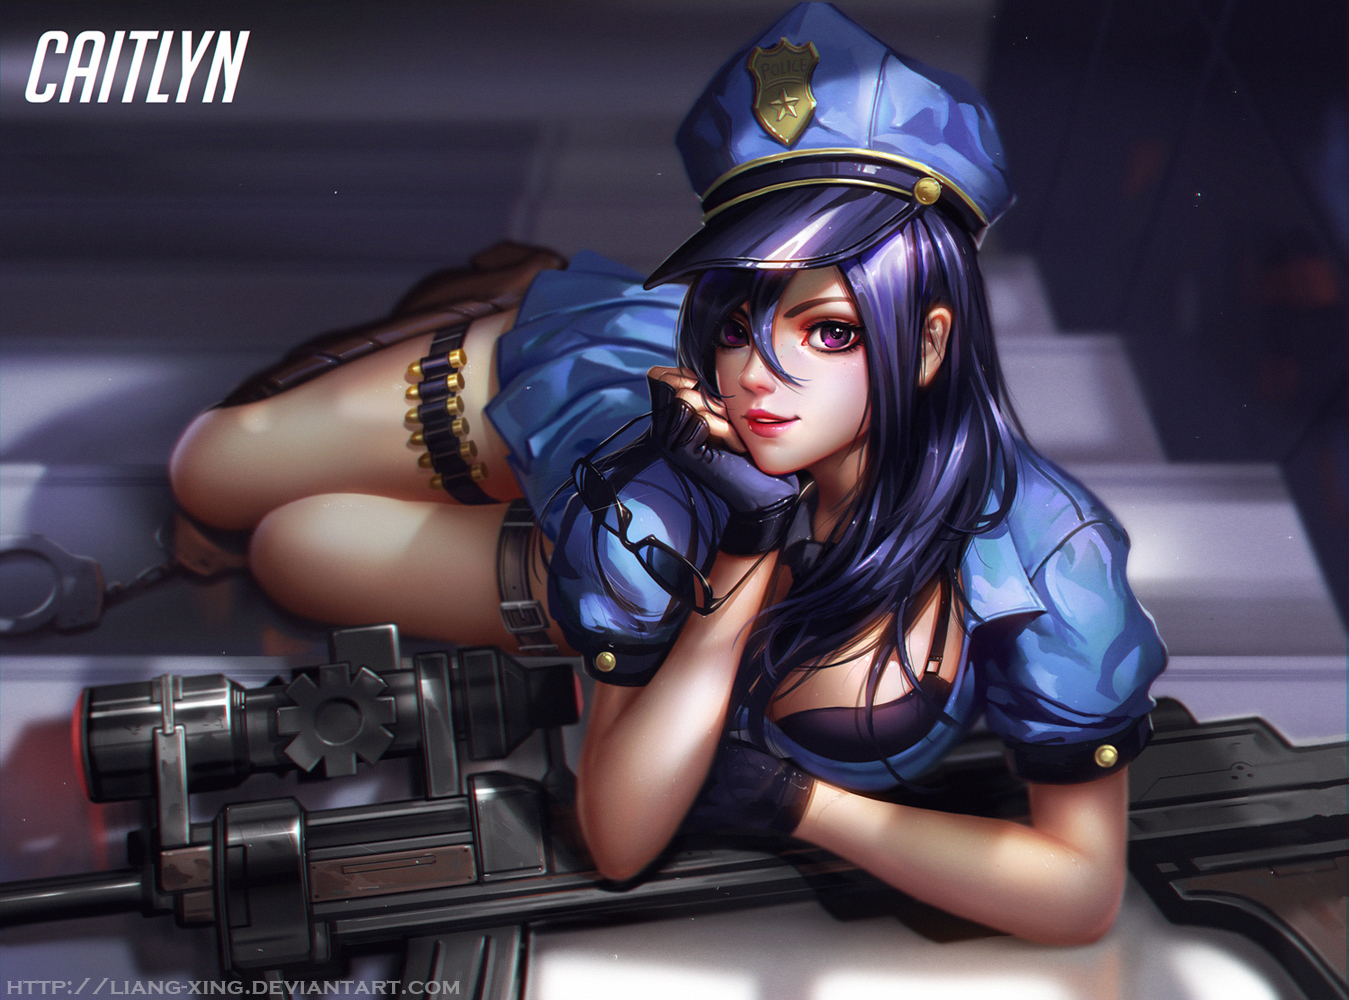 __caitlyn_and_officer_caitlyn_league_of_legends_drawn_by_liang_xing__011a7f45ae685dd388db74c560e34aff.jpg